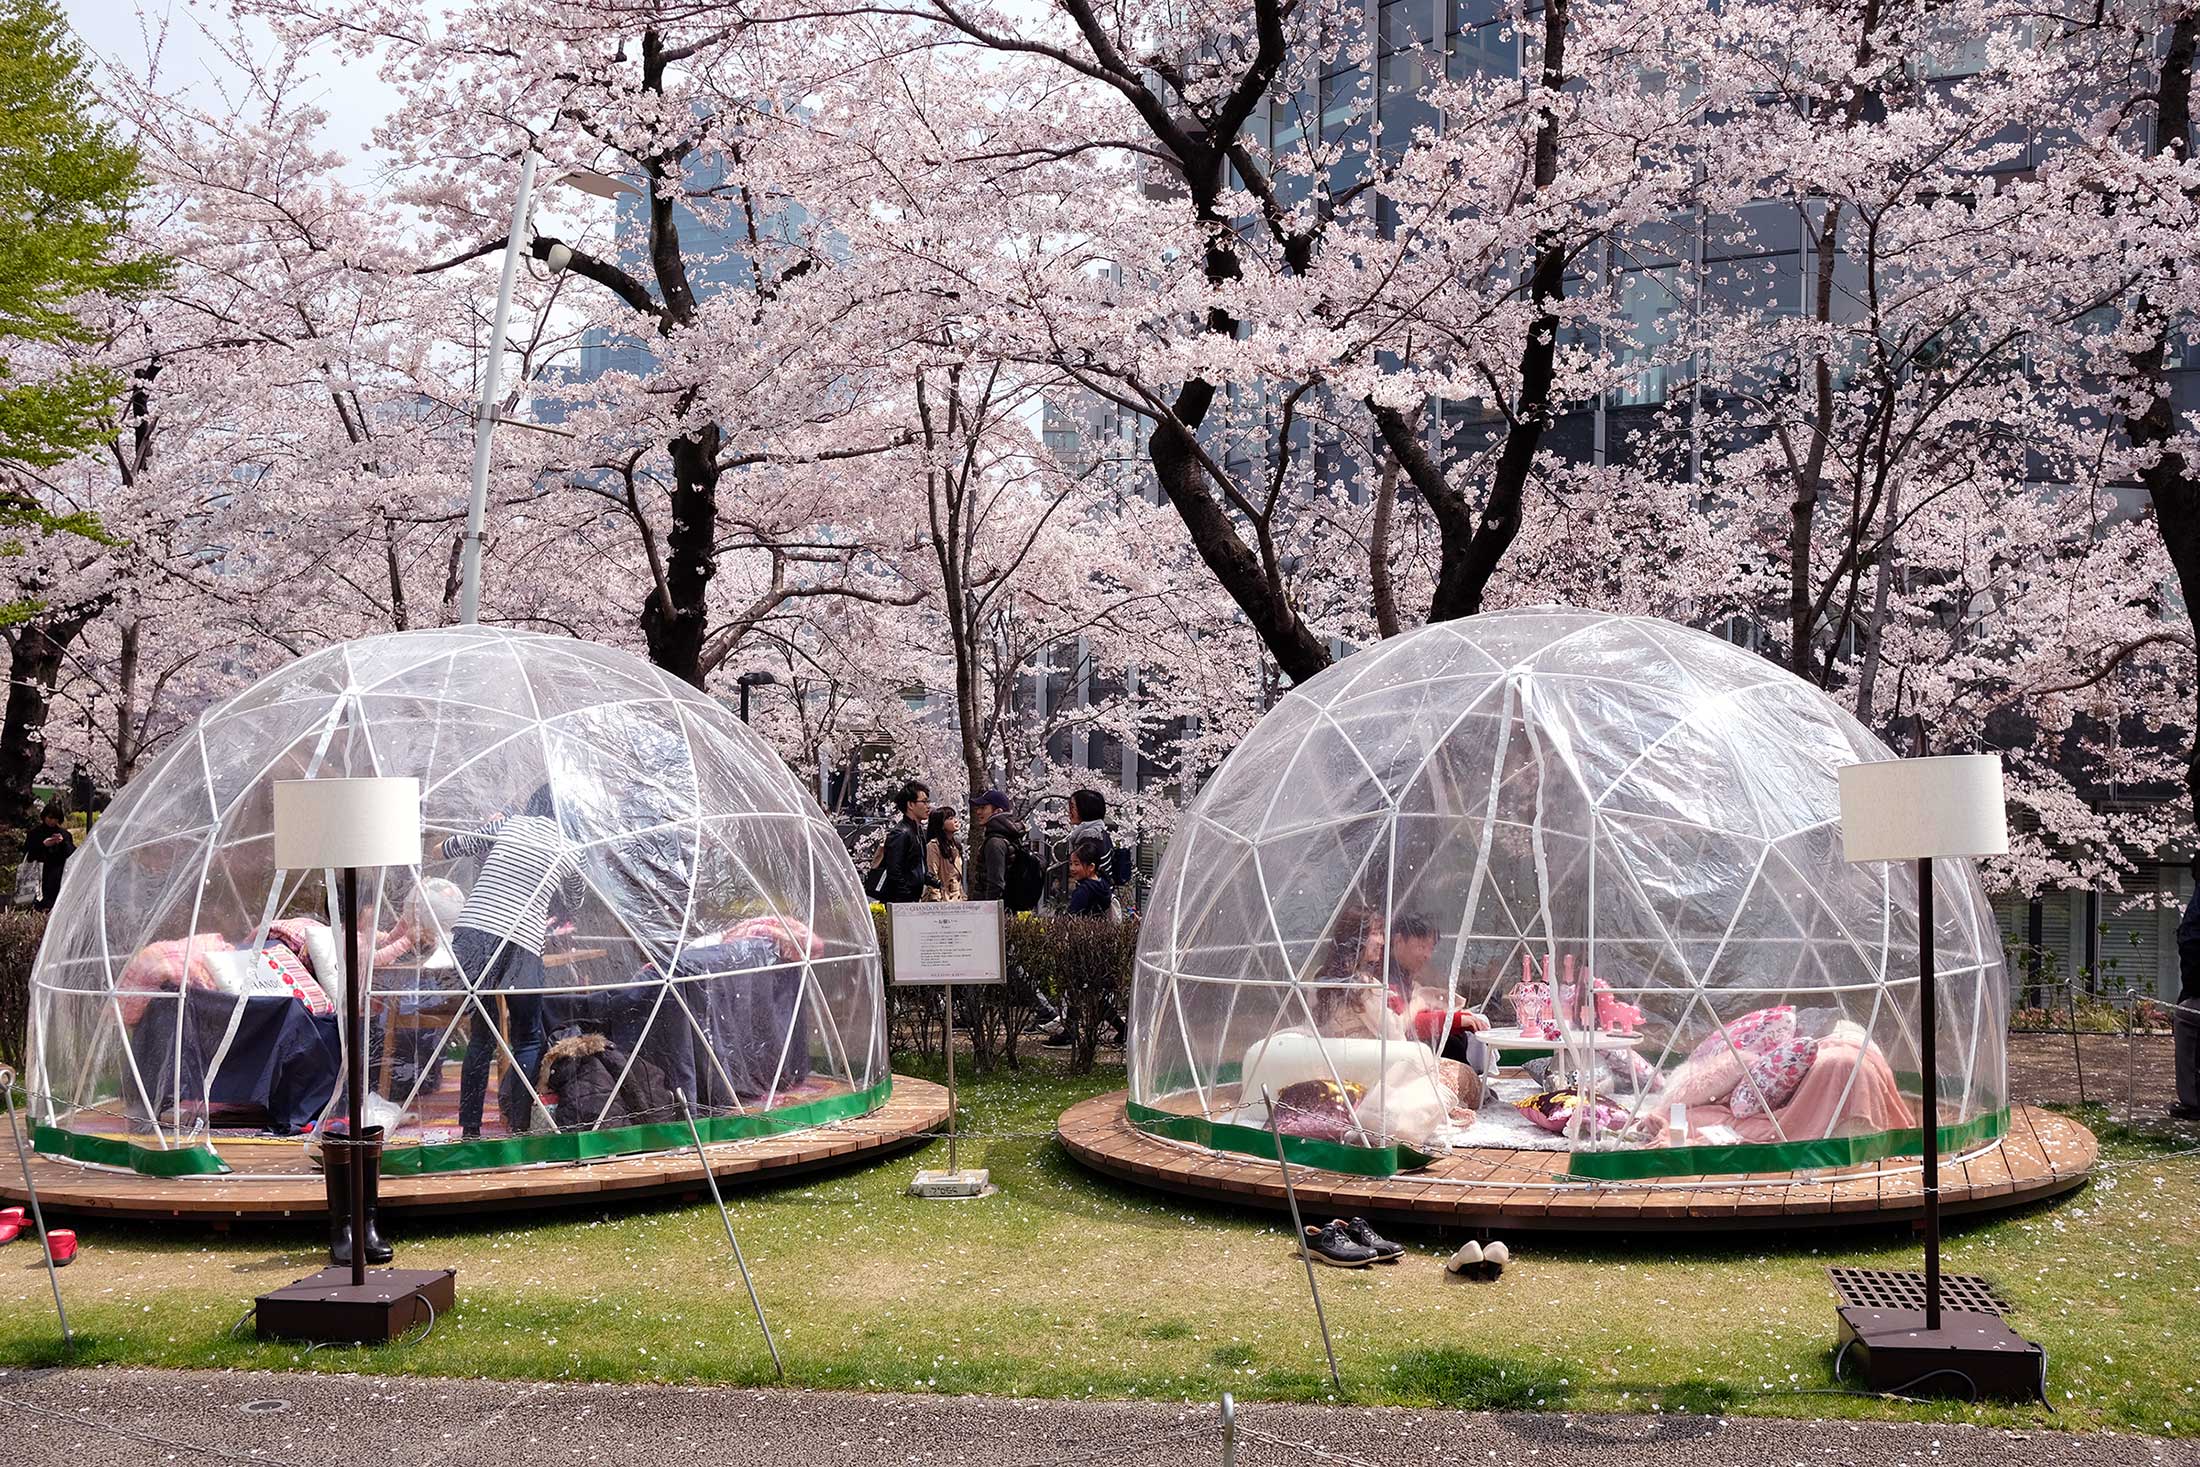 The Big Business Of Japan’s Cherry Blossoms